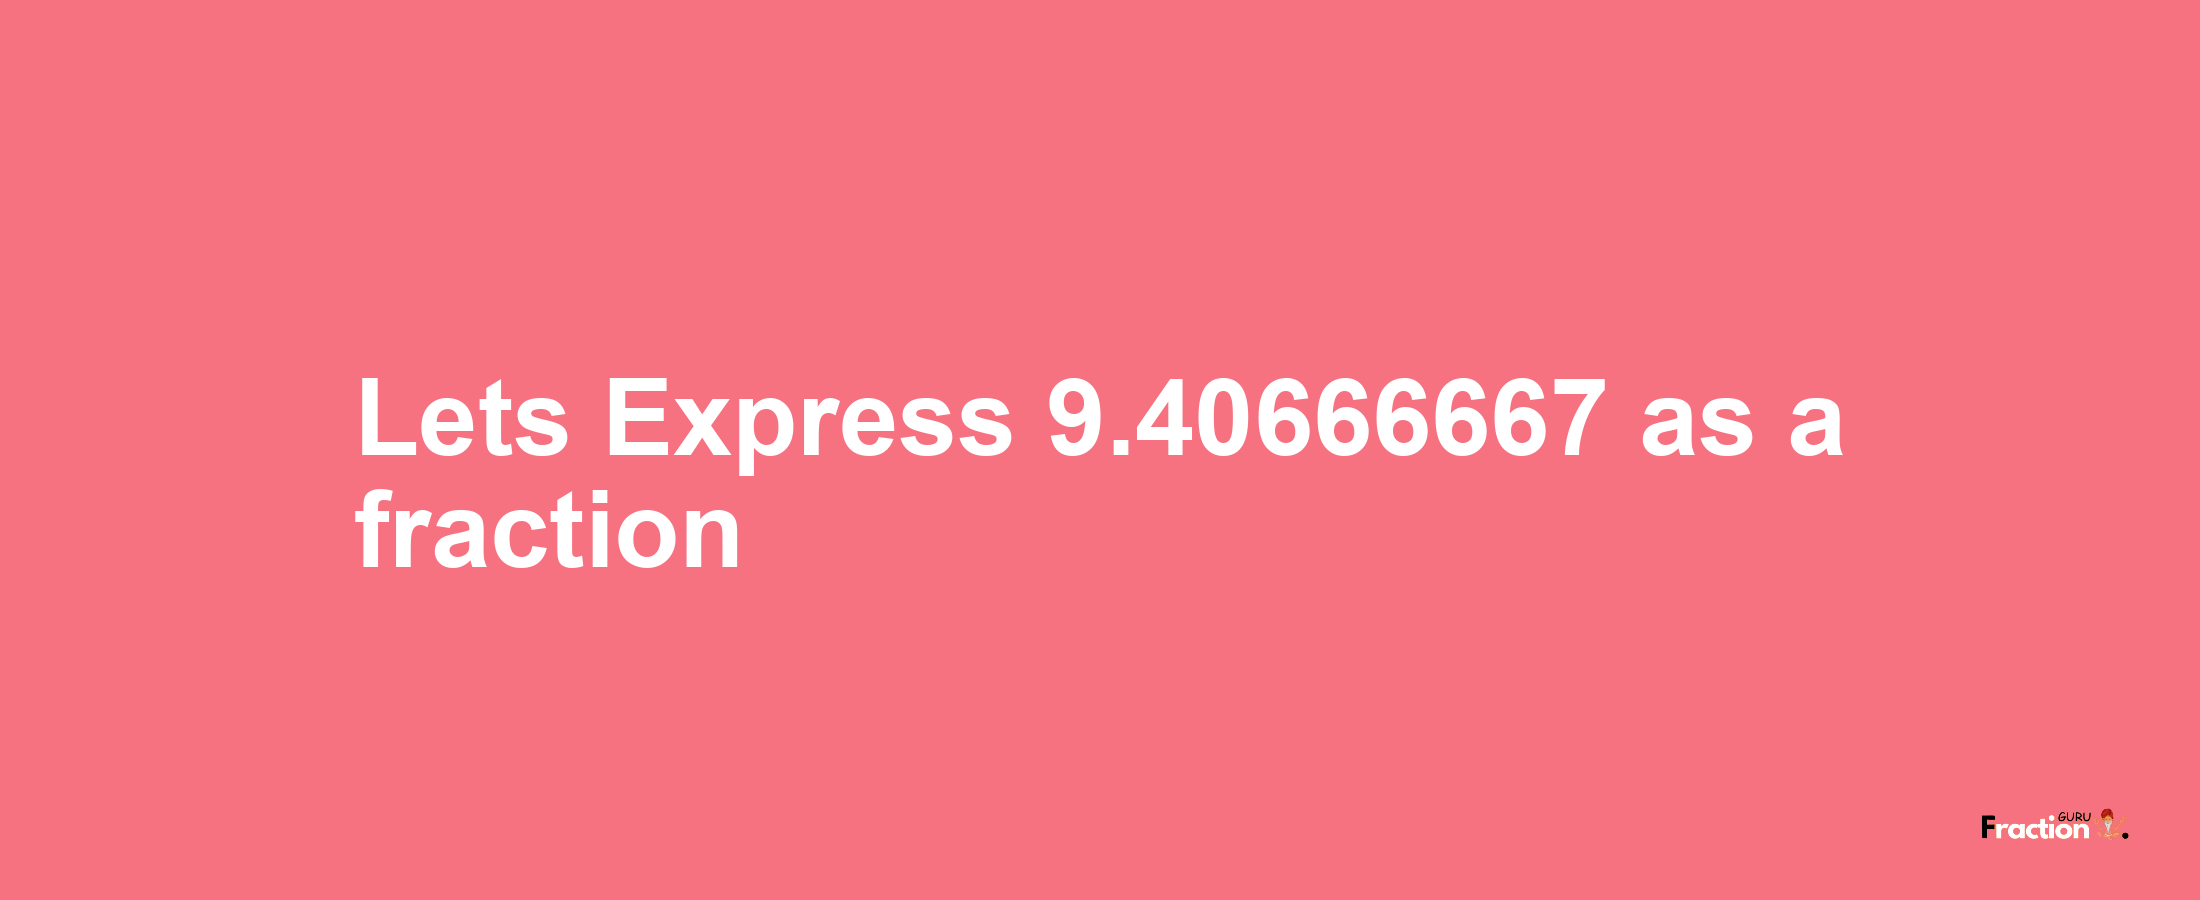 Lets Express 9.40666667 as afraction